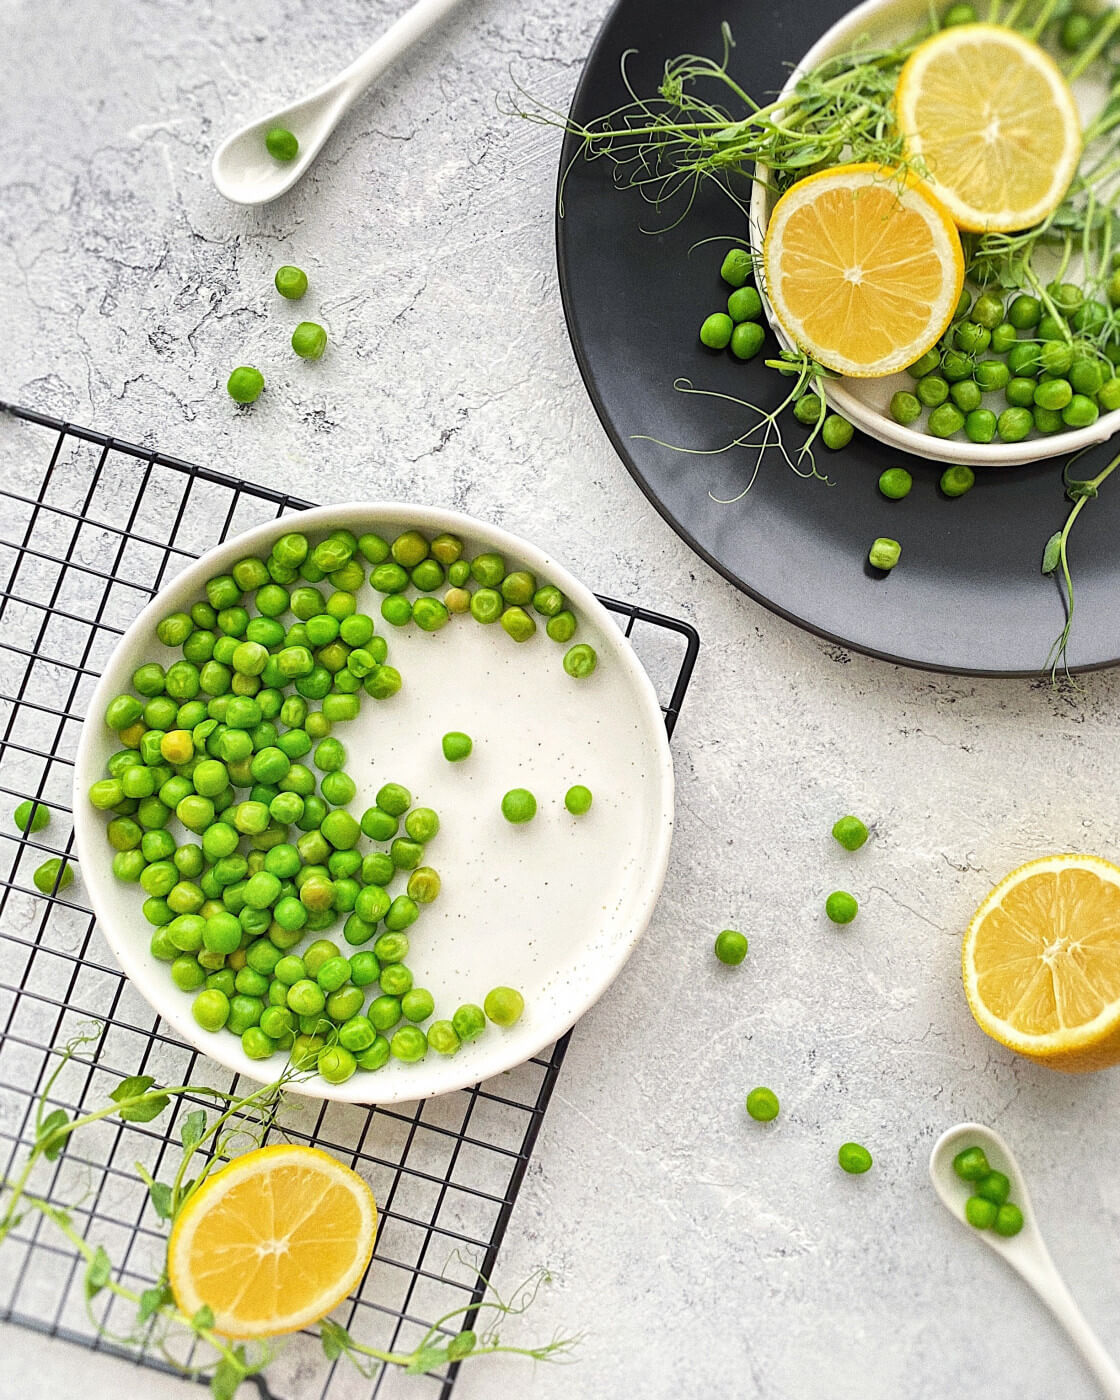 Bowl of peas with lemon garnish | Carbs after bariatric surgery article